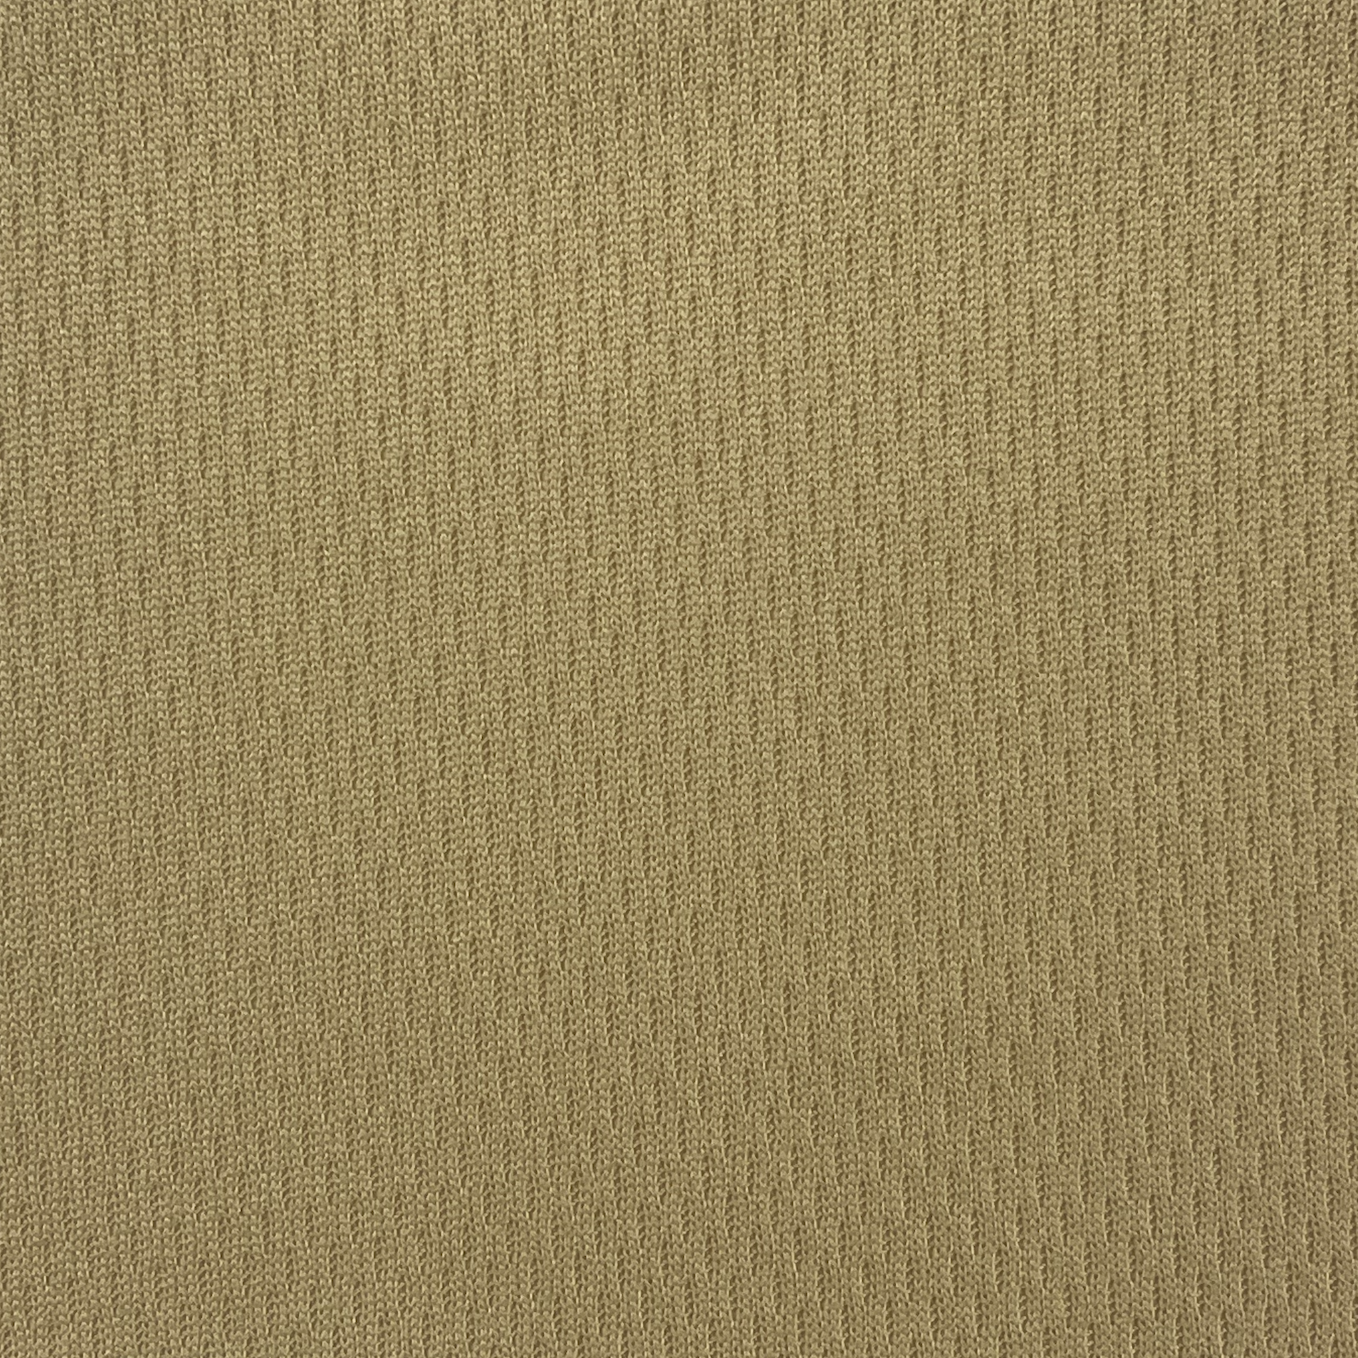 Double Knit Polyester Wicking Fabric (Sold per Yard)